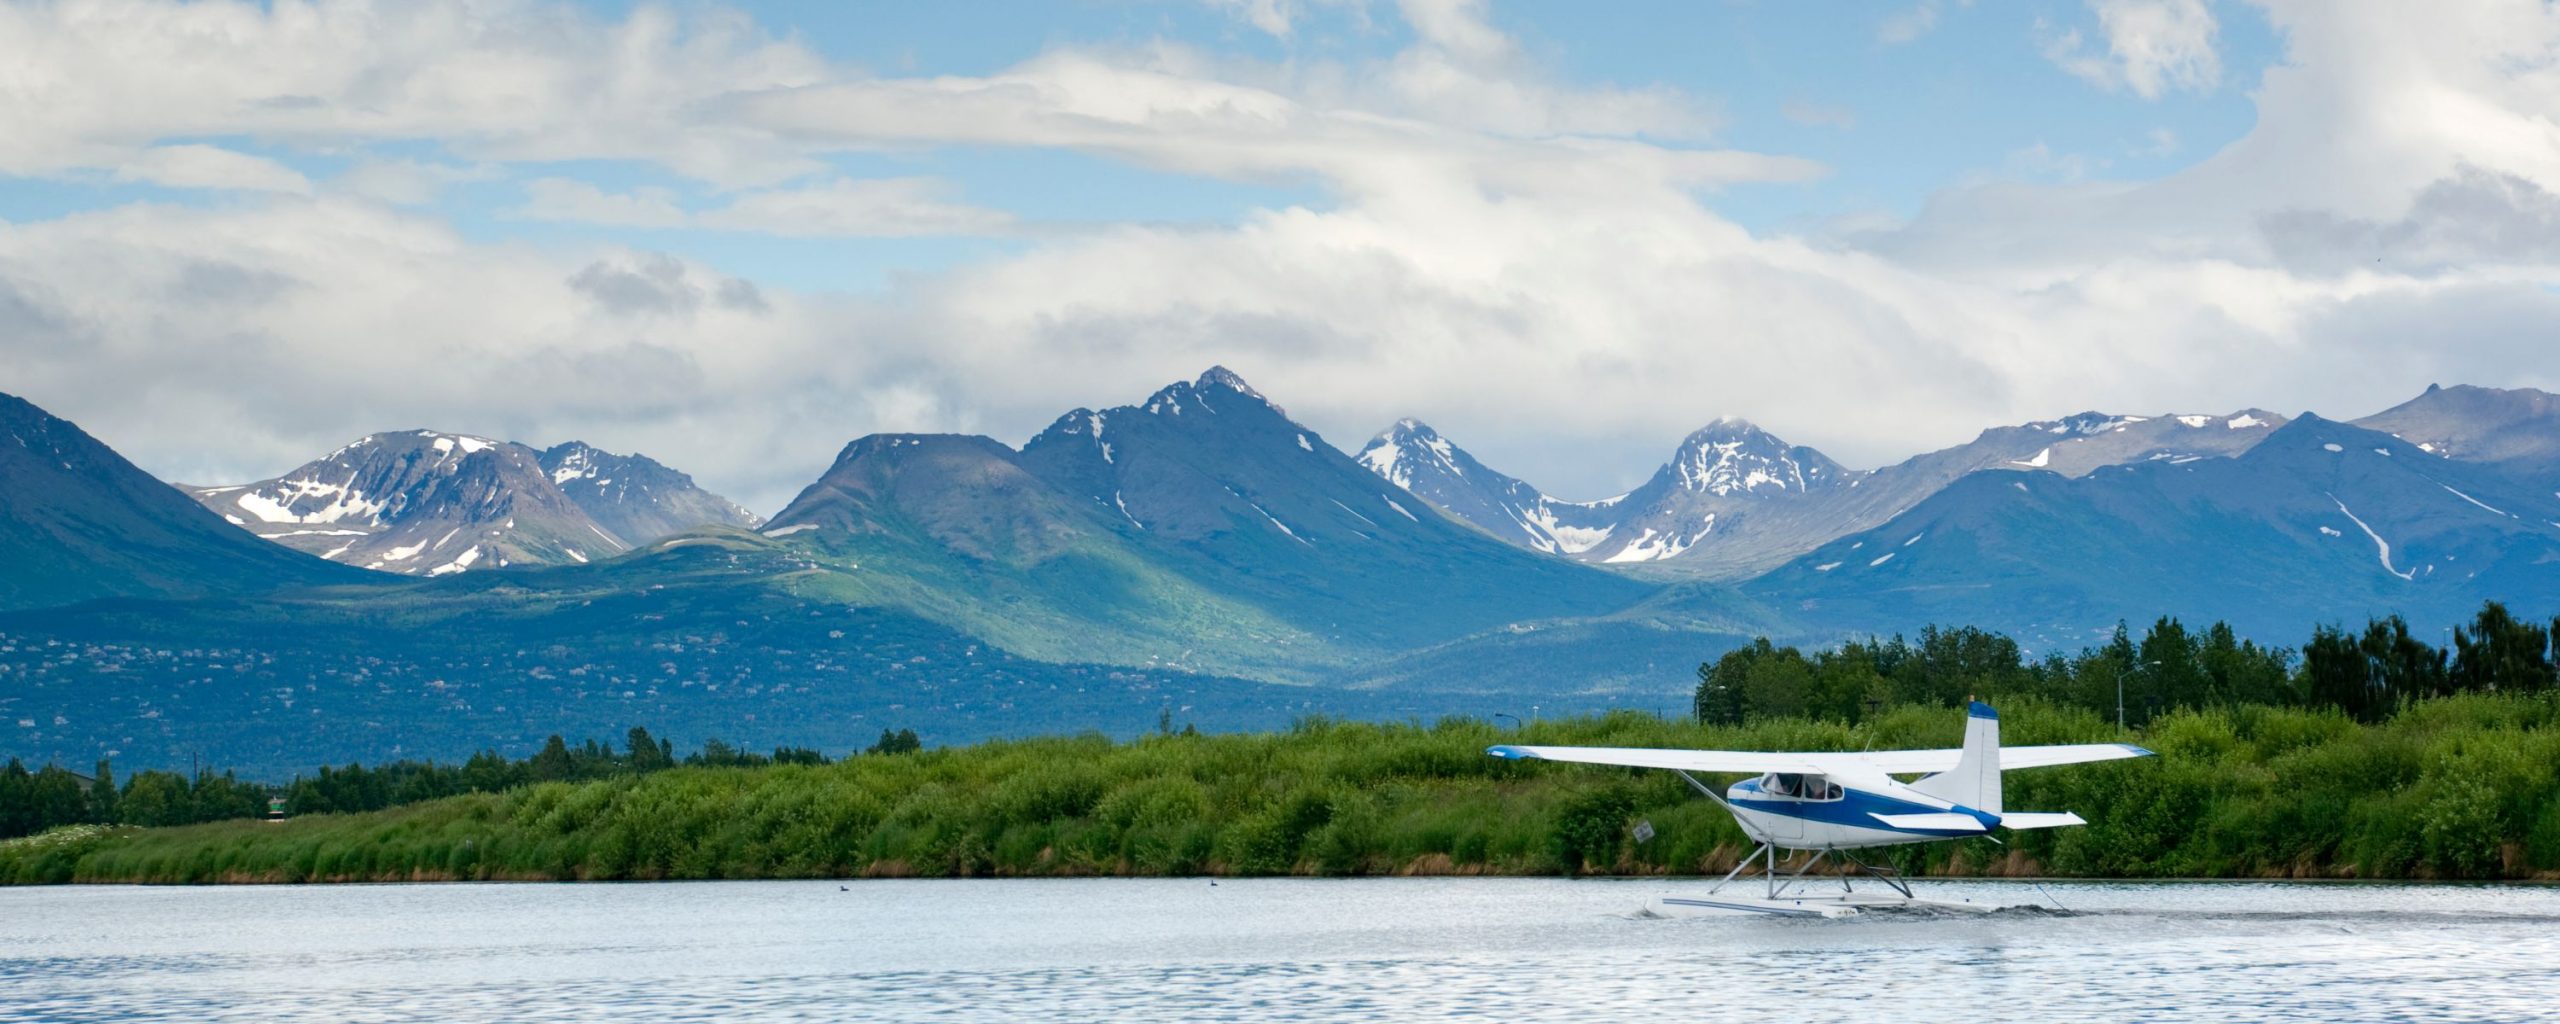 A plane taking off from the water in Alaska